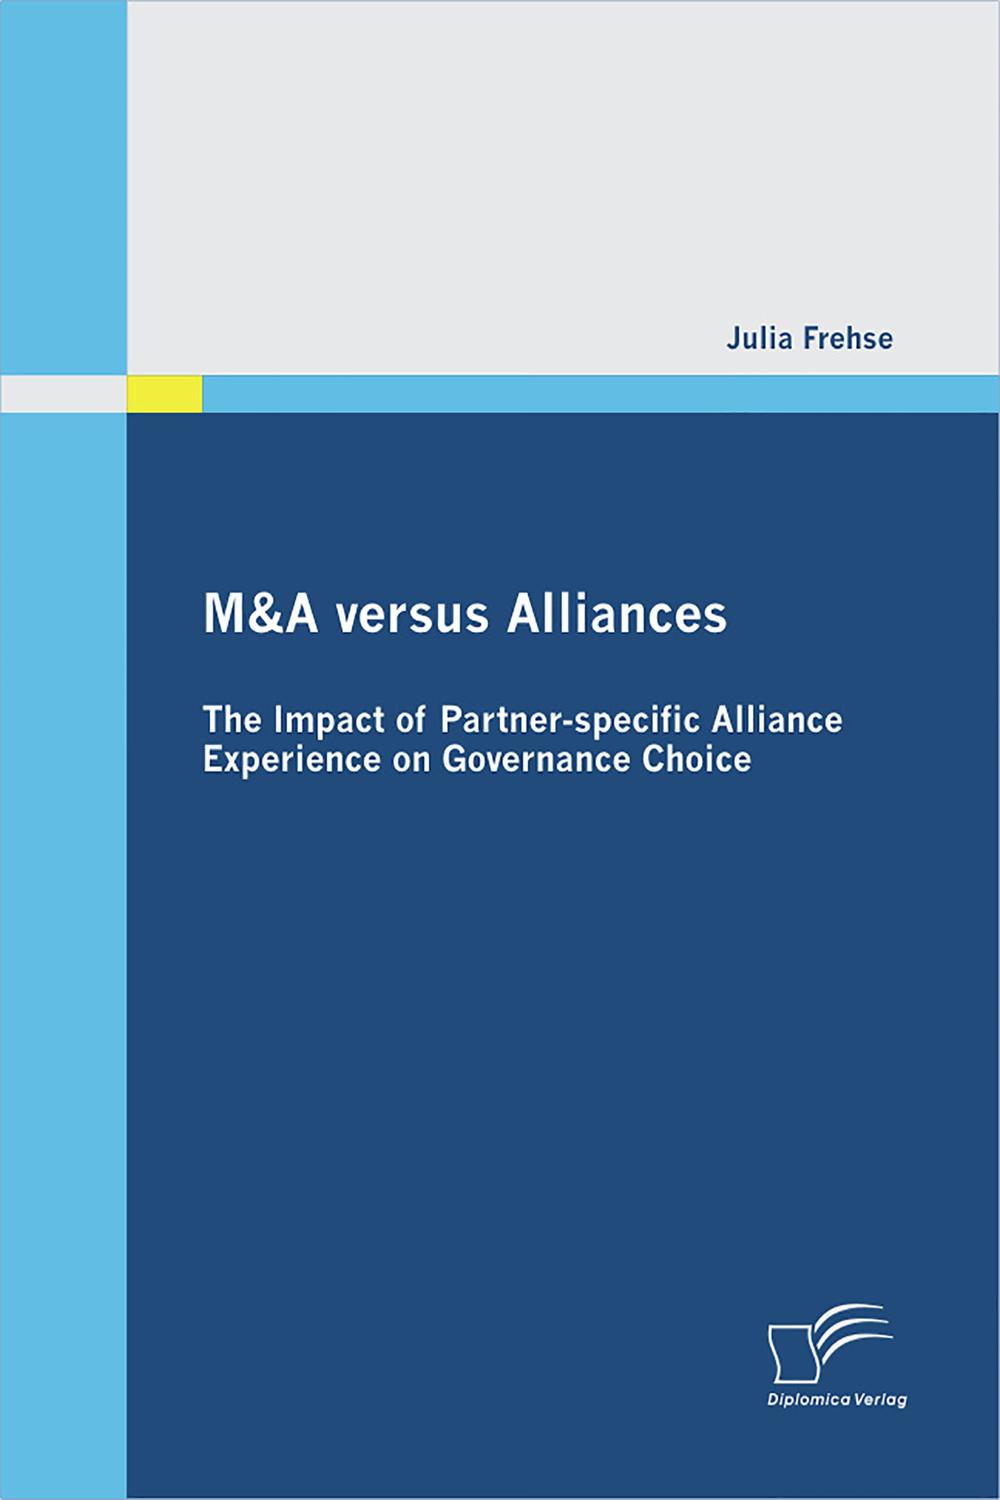 M&A versus Alliances: The Impact of Partner-specific Alliance Experience on Governance Choice - Julia Frehse